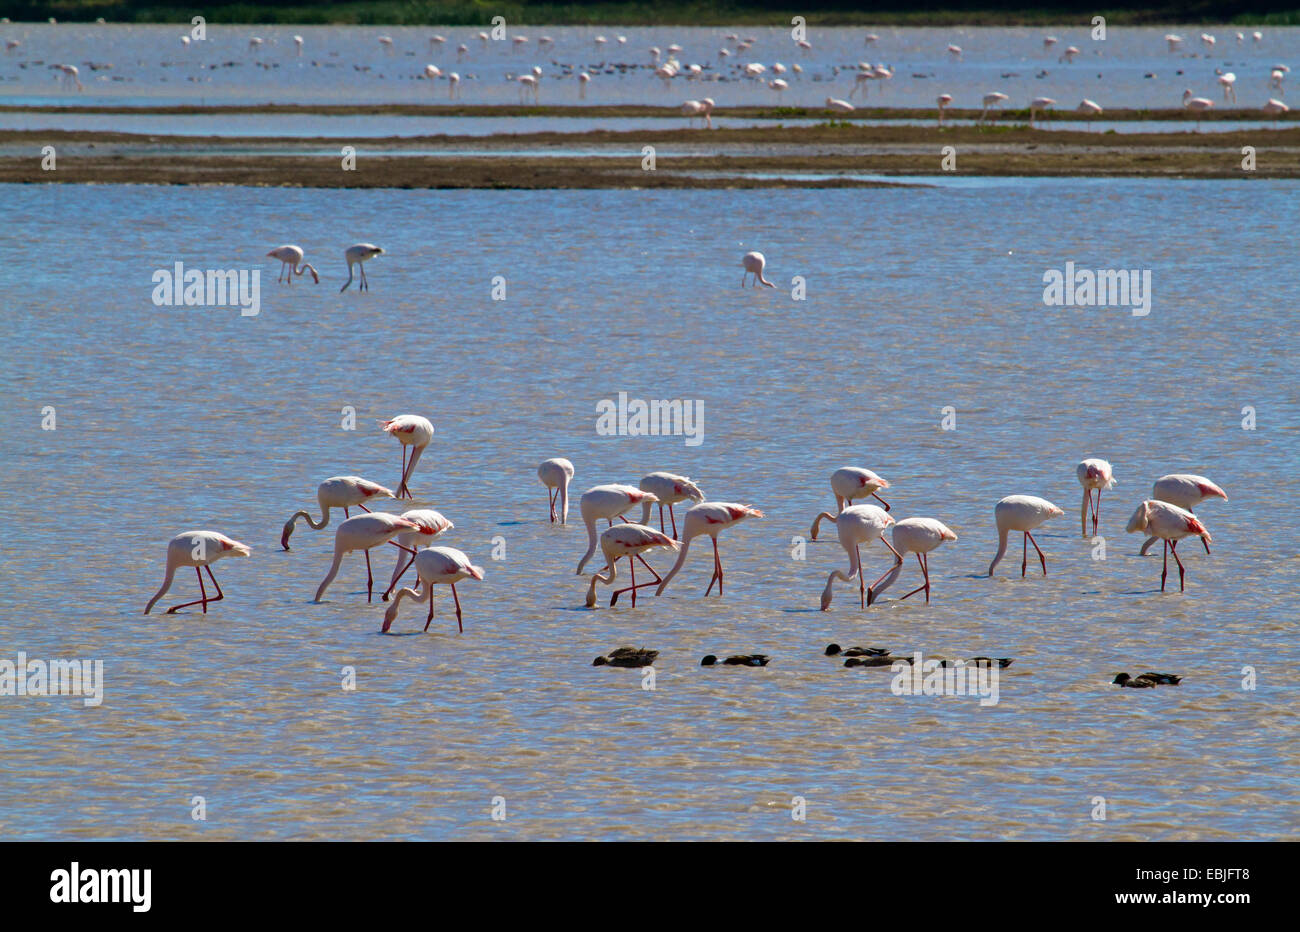 greater flamingo (Phoenicopterus roseus, Phoenicopterus ruber roseus), lots of birds standing in shallow water looking for food, Spain, Andalusia, Coto De Donana National Park, El Rocio Stock Photo